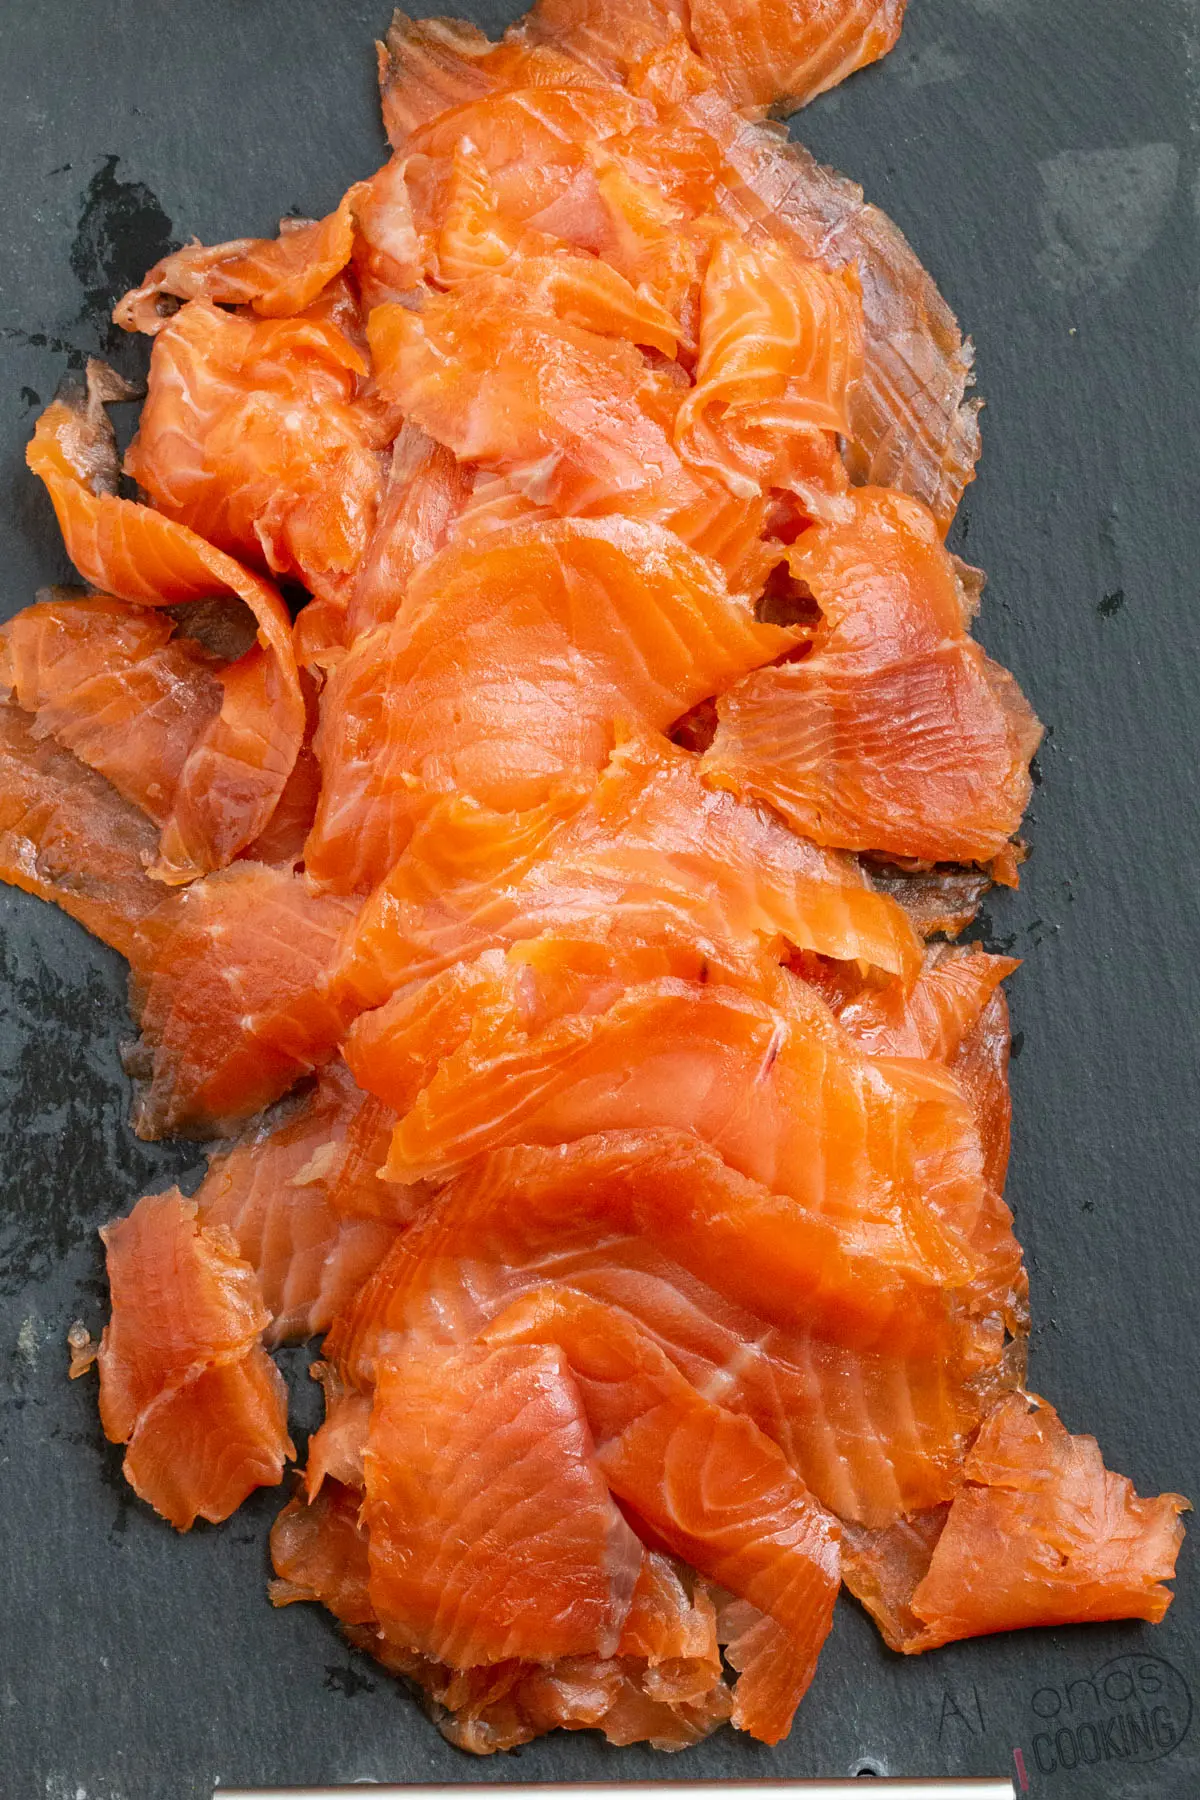 do you cook smoked salmon - Does smoked salmon taste different to cooked salmon